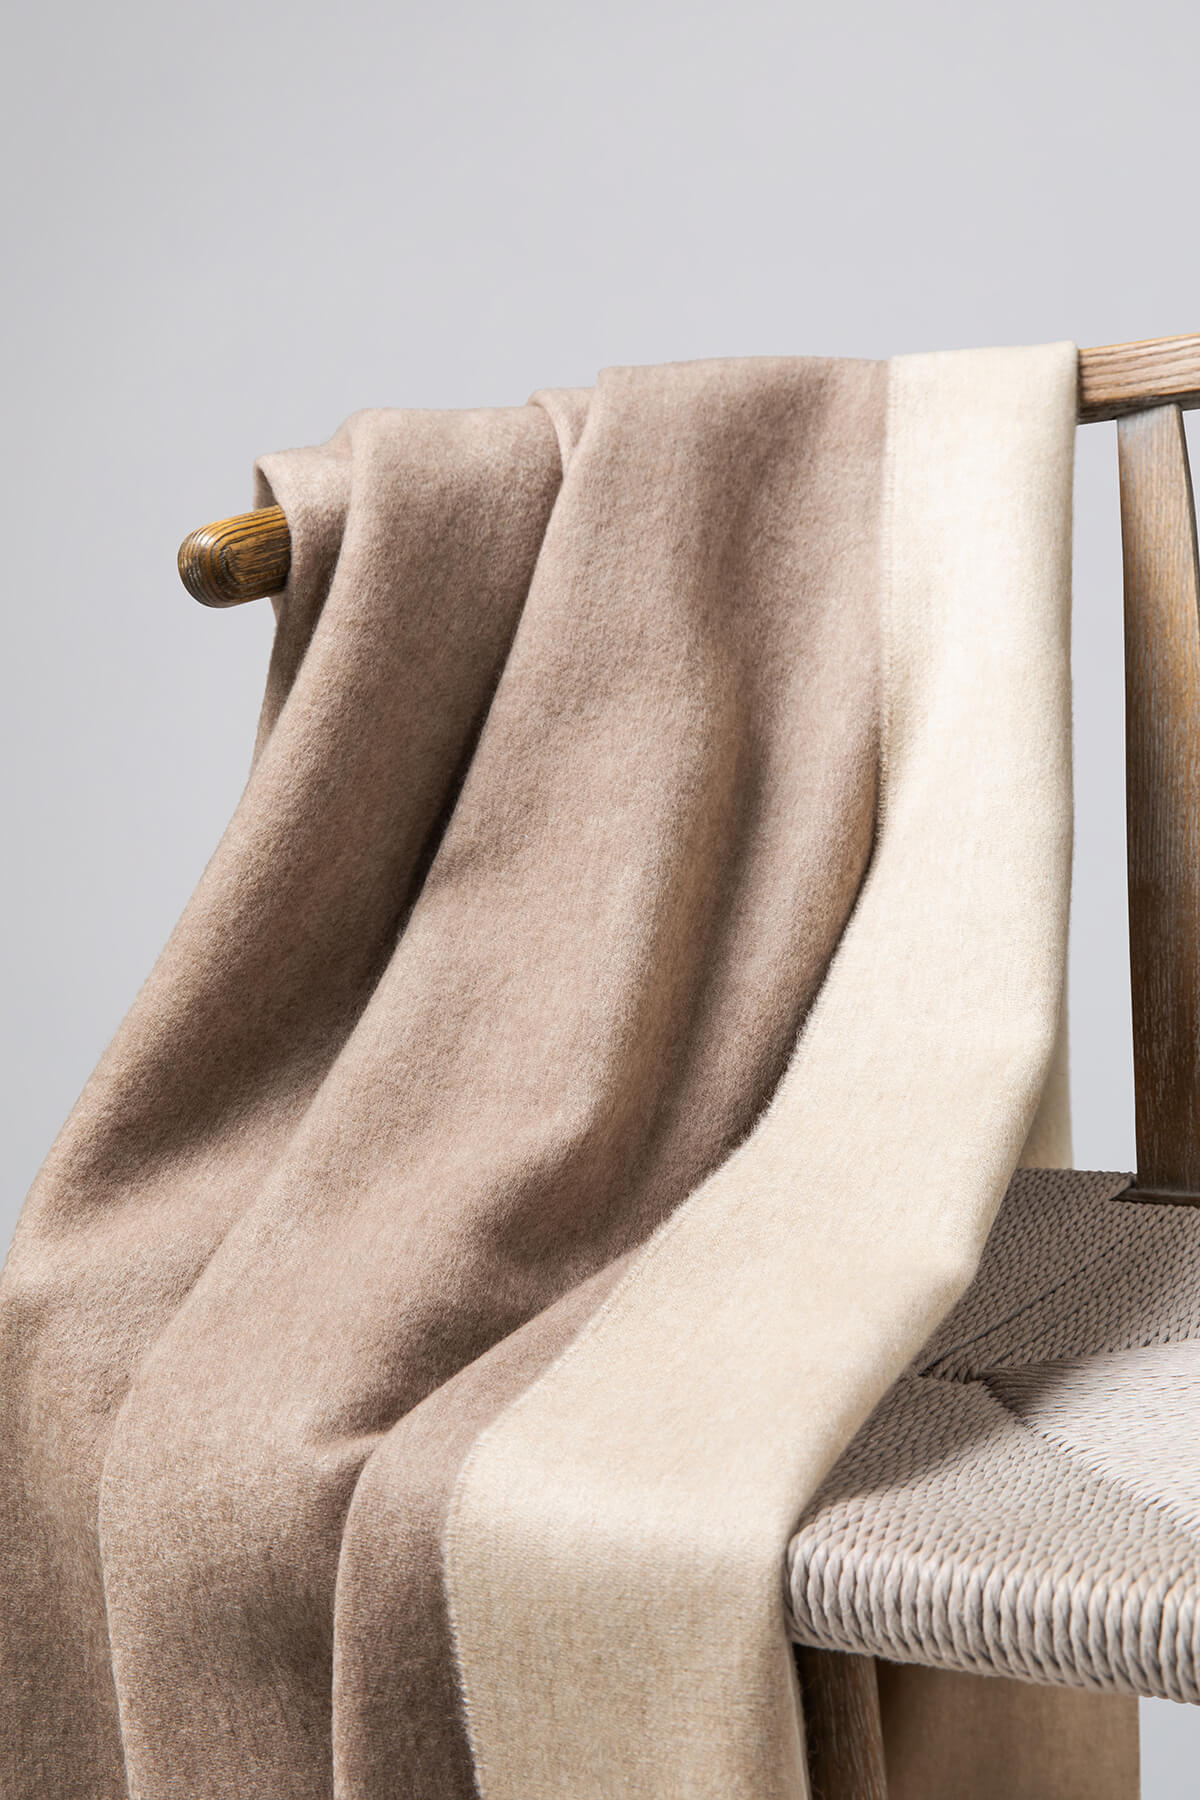 Detail of Johnstons of Elgin Reversible Pure Cashmere Throw in Light Brown & Light Grey draped over a wooden chair on a white background WA000013RU5594ONE